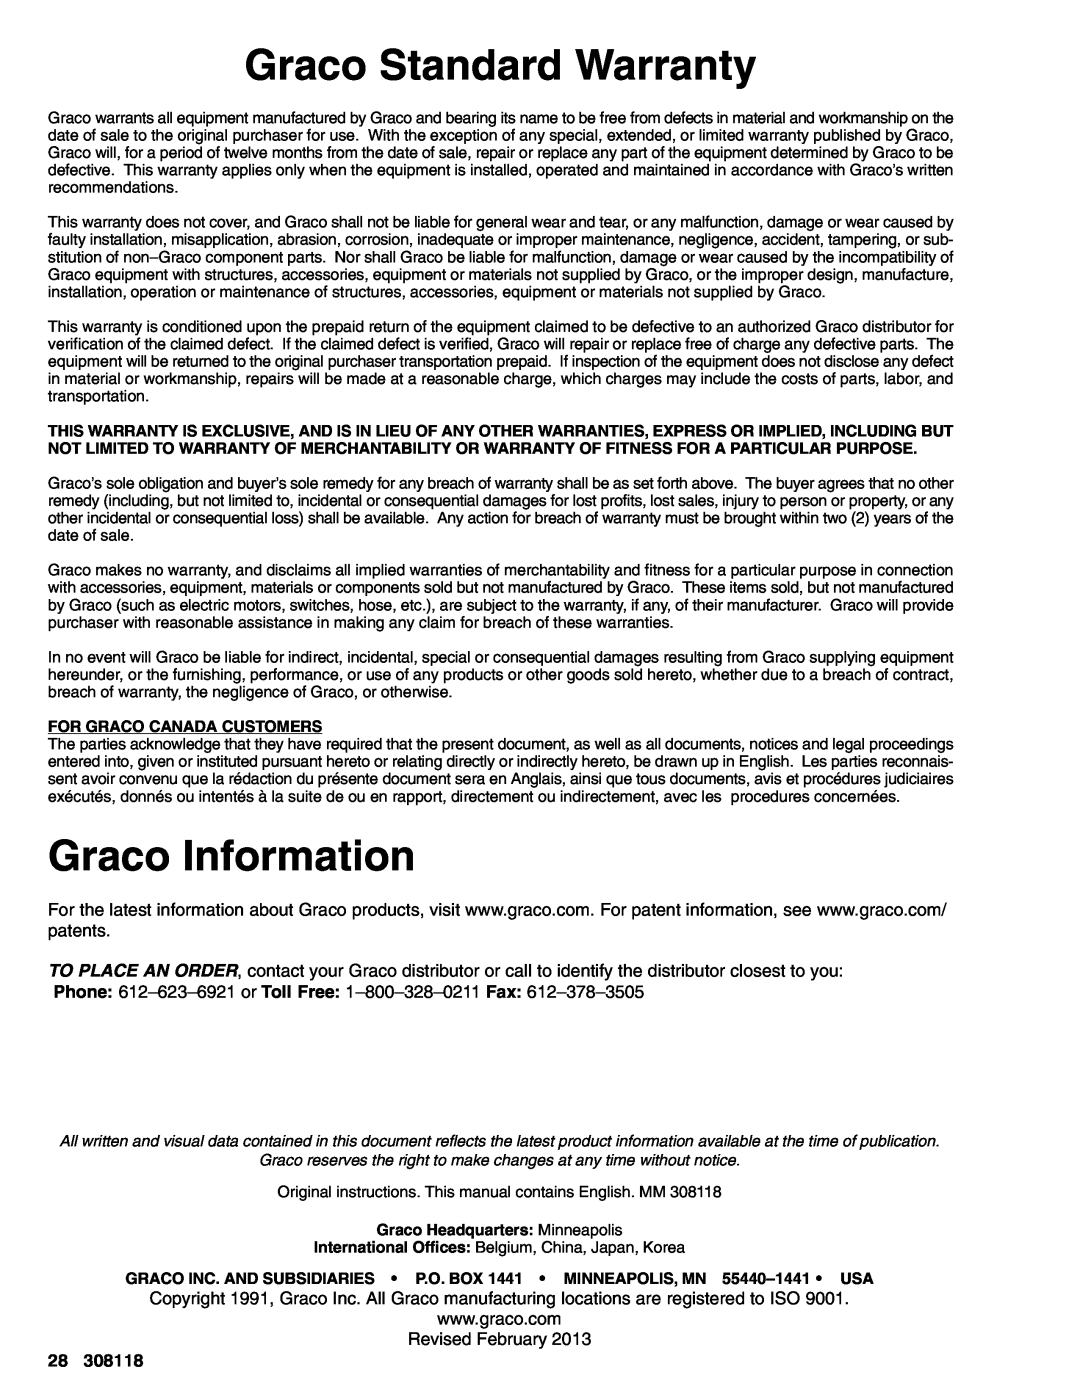 Graco 256713, 256714, 223540, 224348 important safety instructions Graco Standard Warranty, Graco Information 